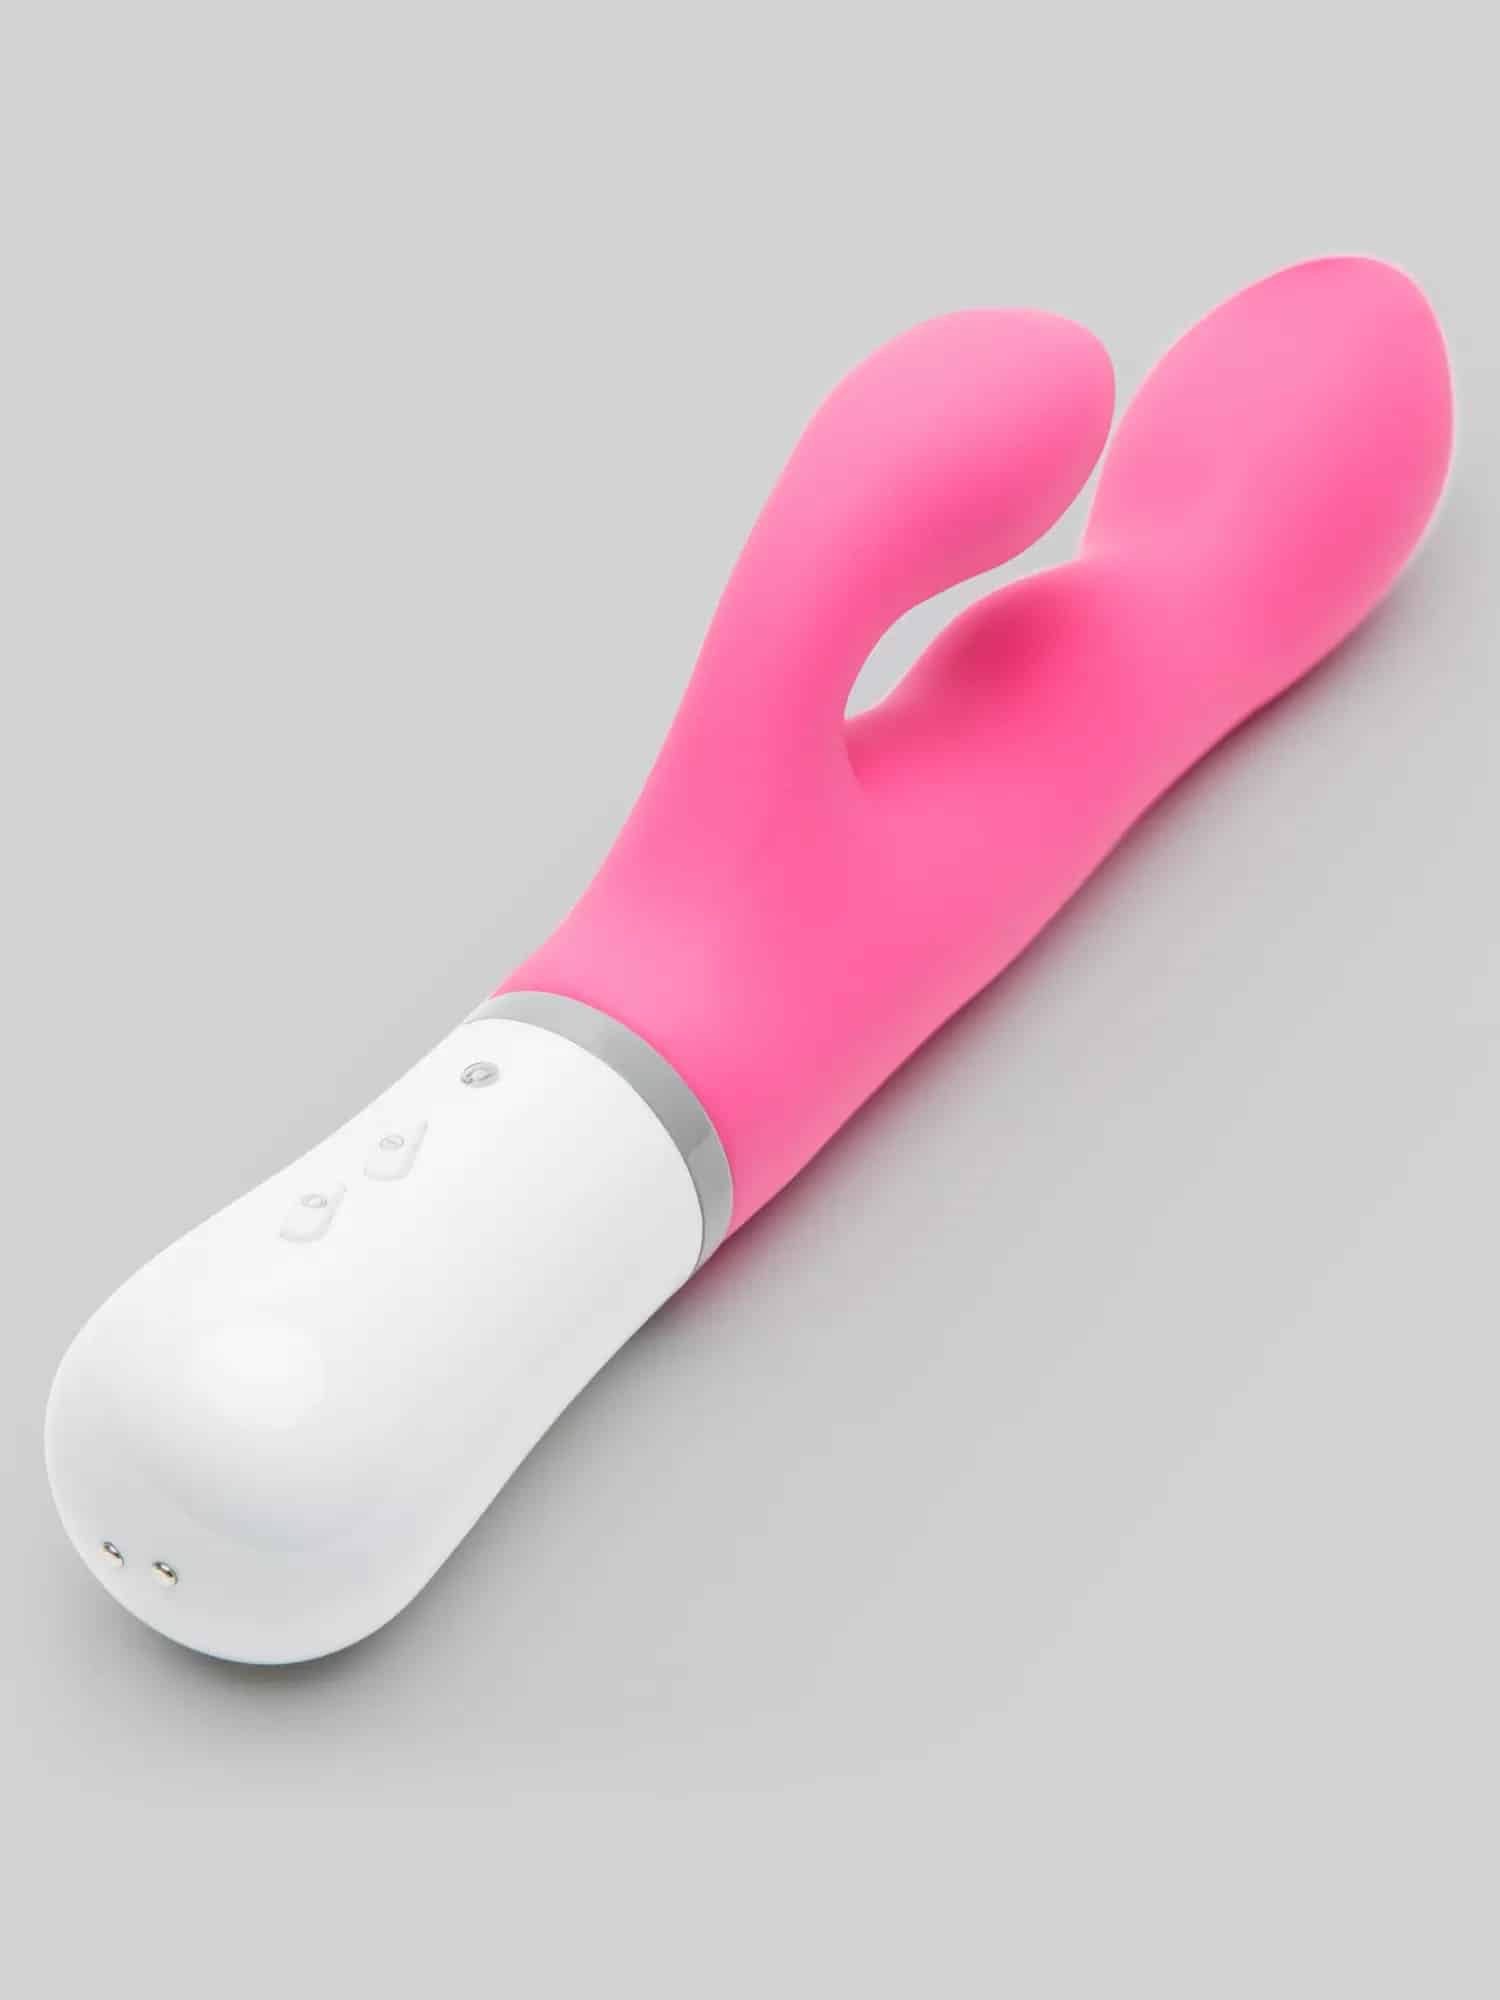 Lovense Nora App Controlled Rechargeable Rotating Rabbit Vibrator. Slide 12